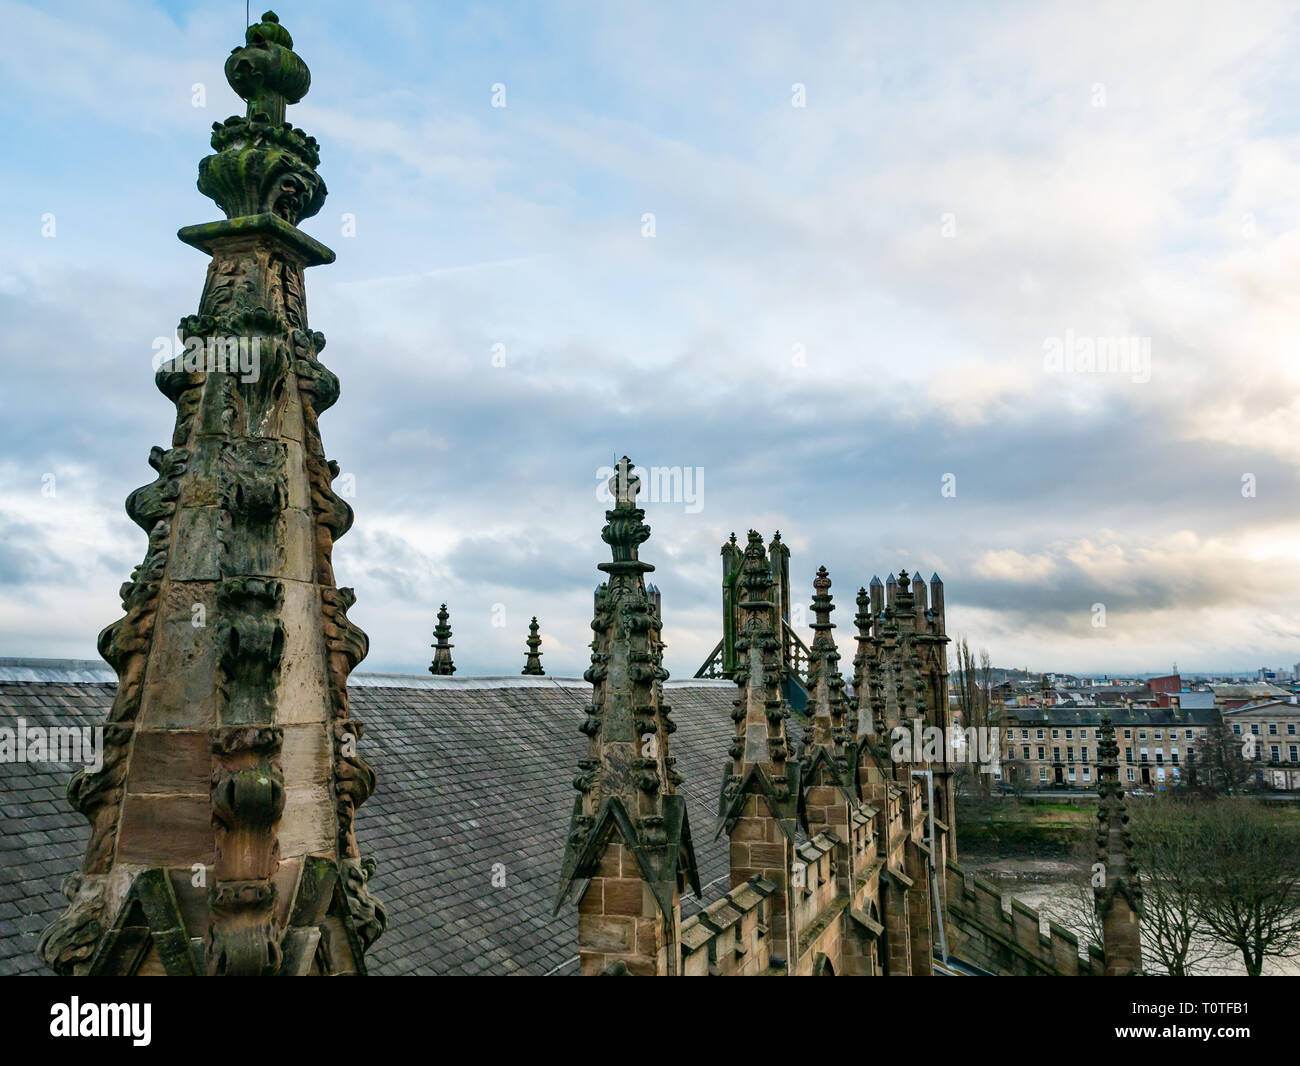 Rooftop view or spires of Metropolitan Curia of Archdiocese of Glasgow overlooking Clyde River, Scotland, UK Stock Photo